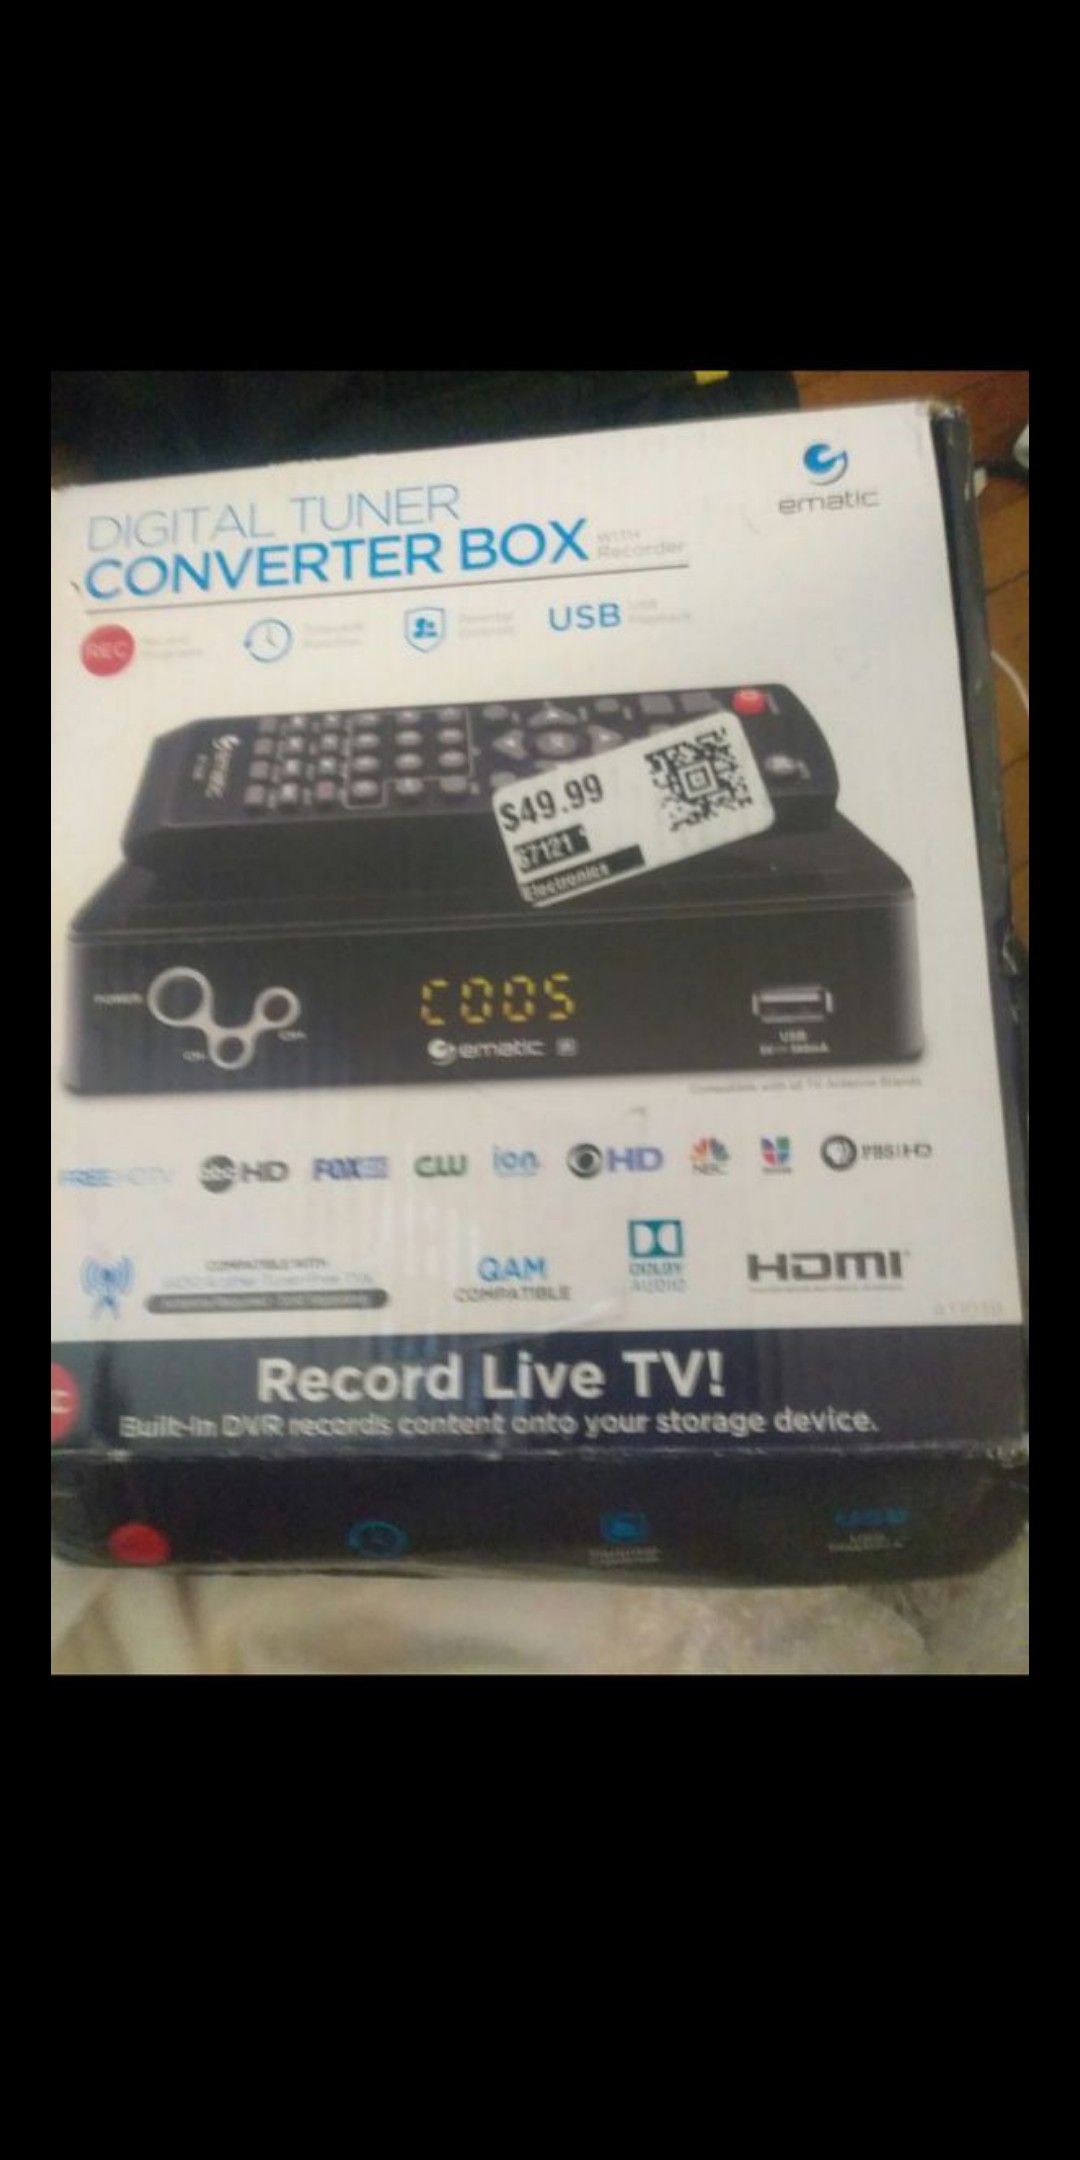 Ematic digital converter box with record live tv